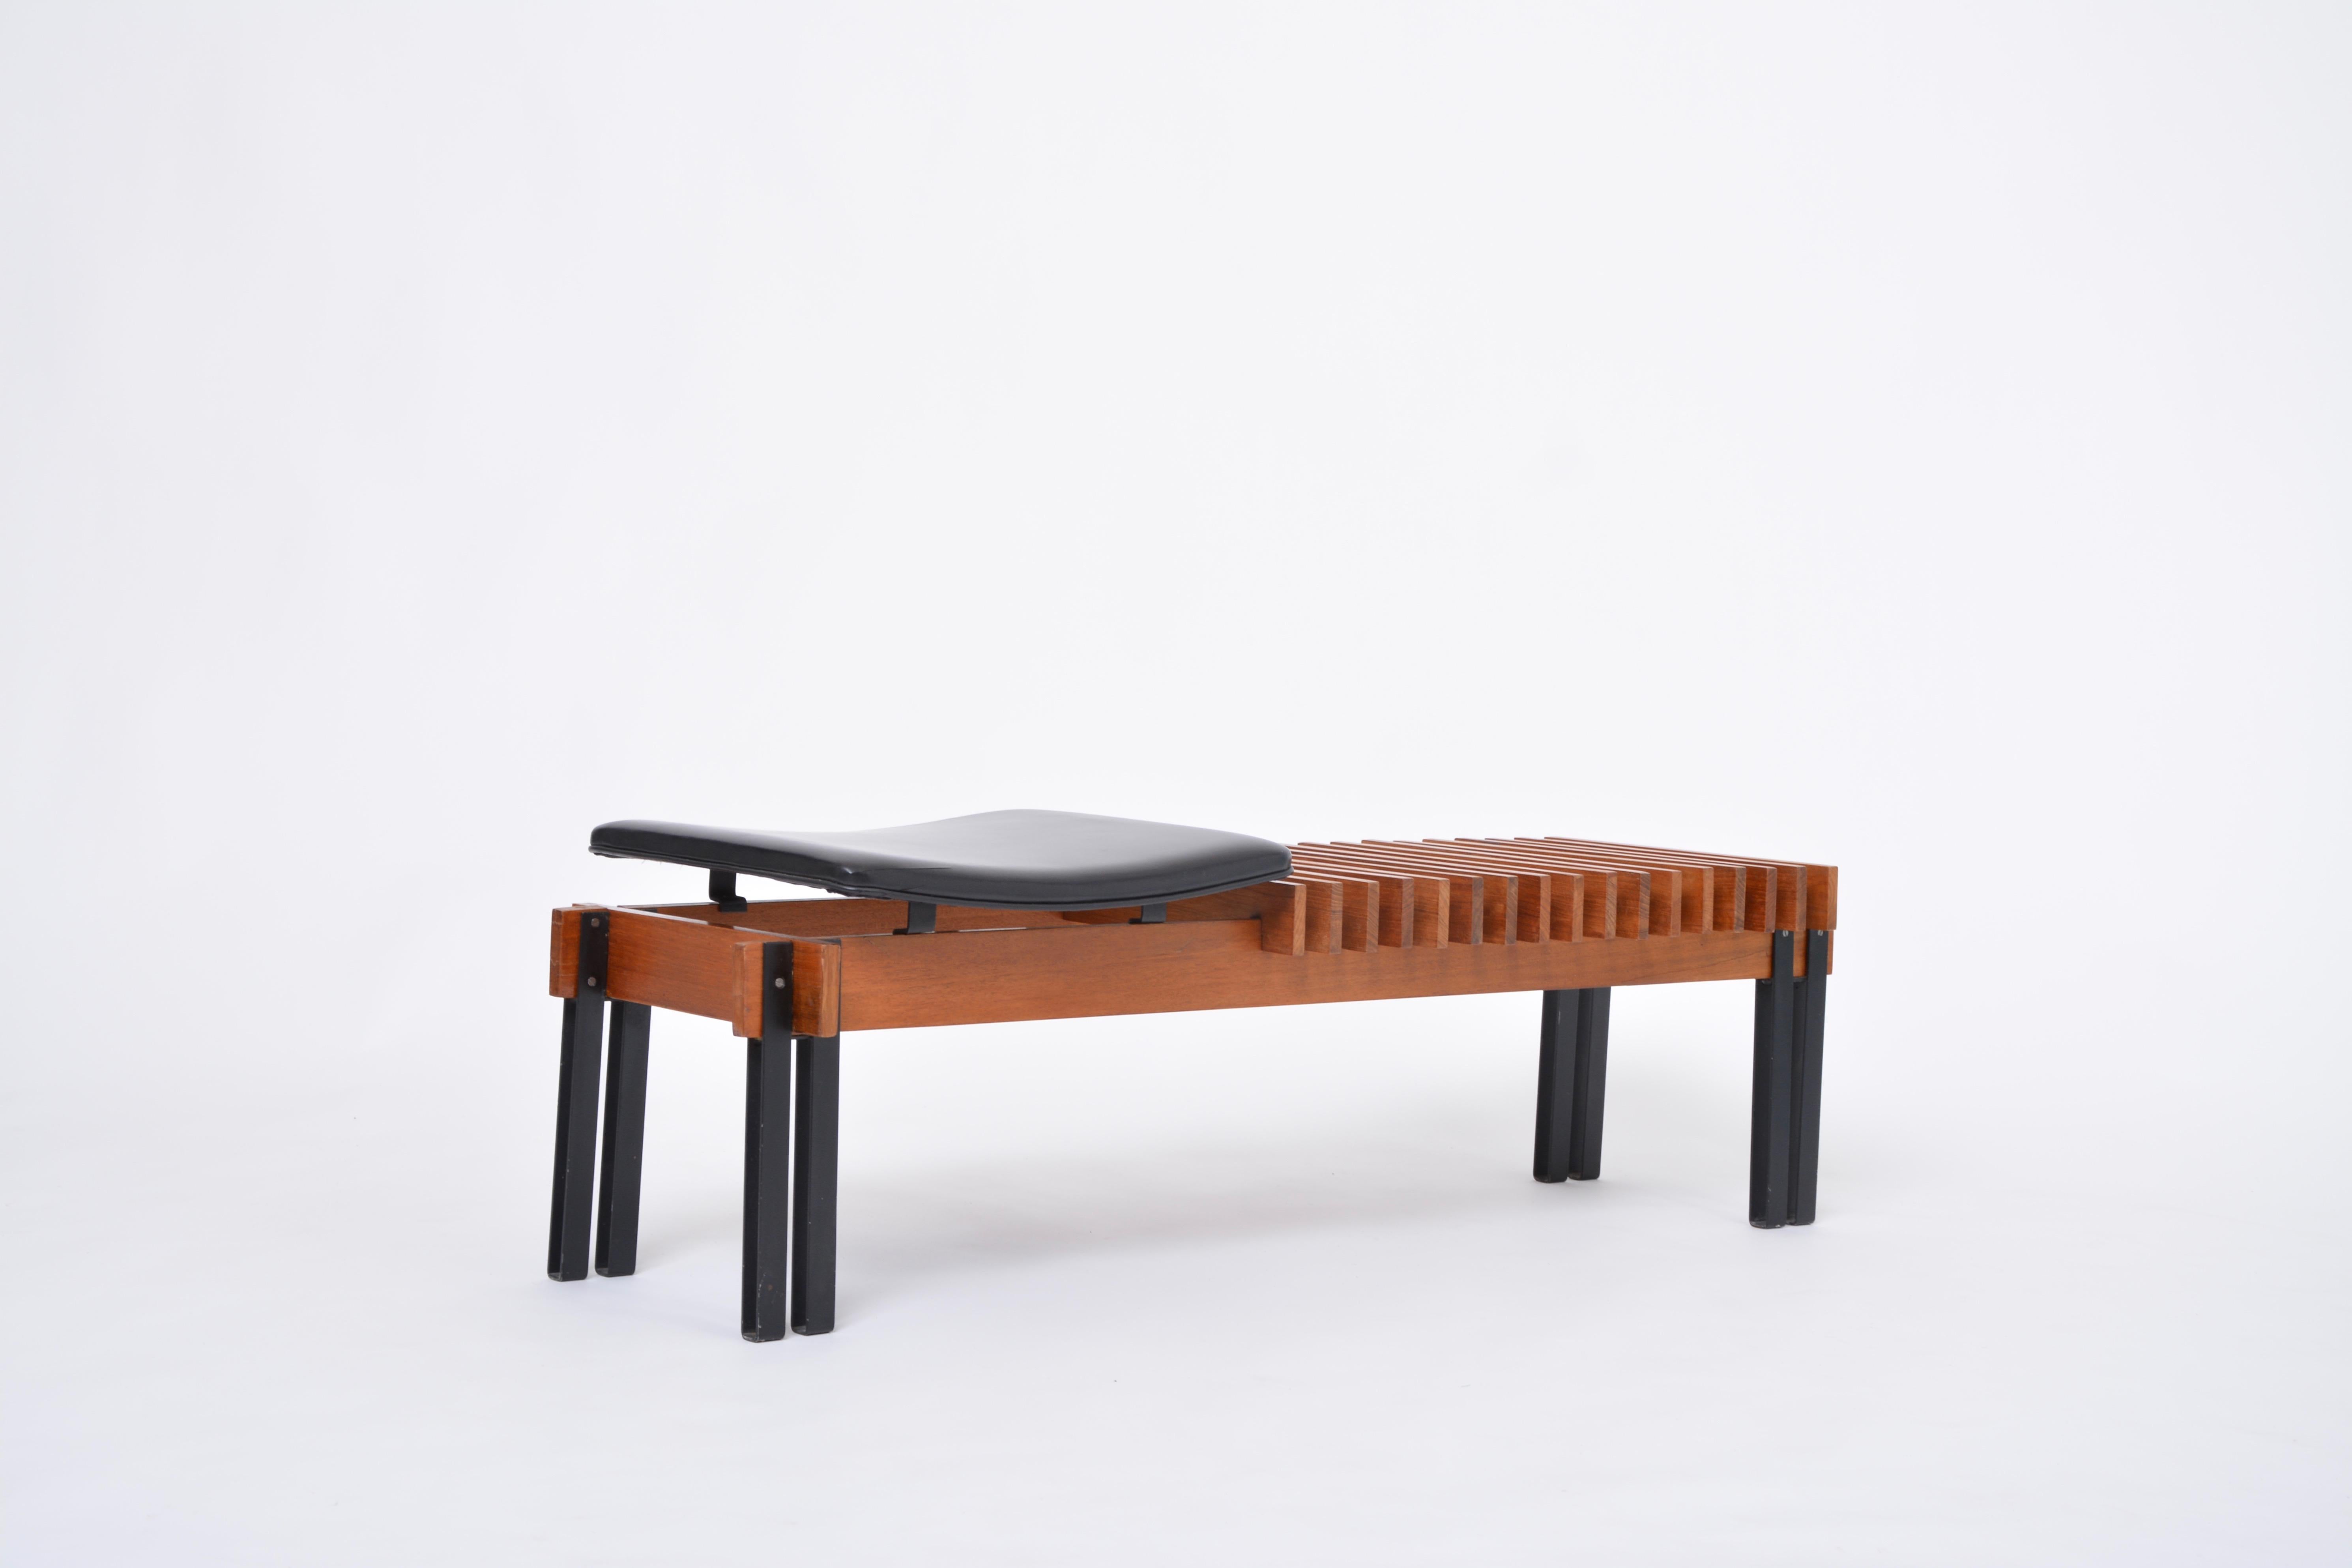 Italian Mid-Century Modern slatted Teak bench by Inge and Luciano Rubino for Apec For Sale